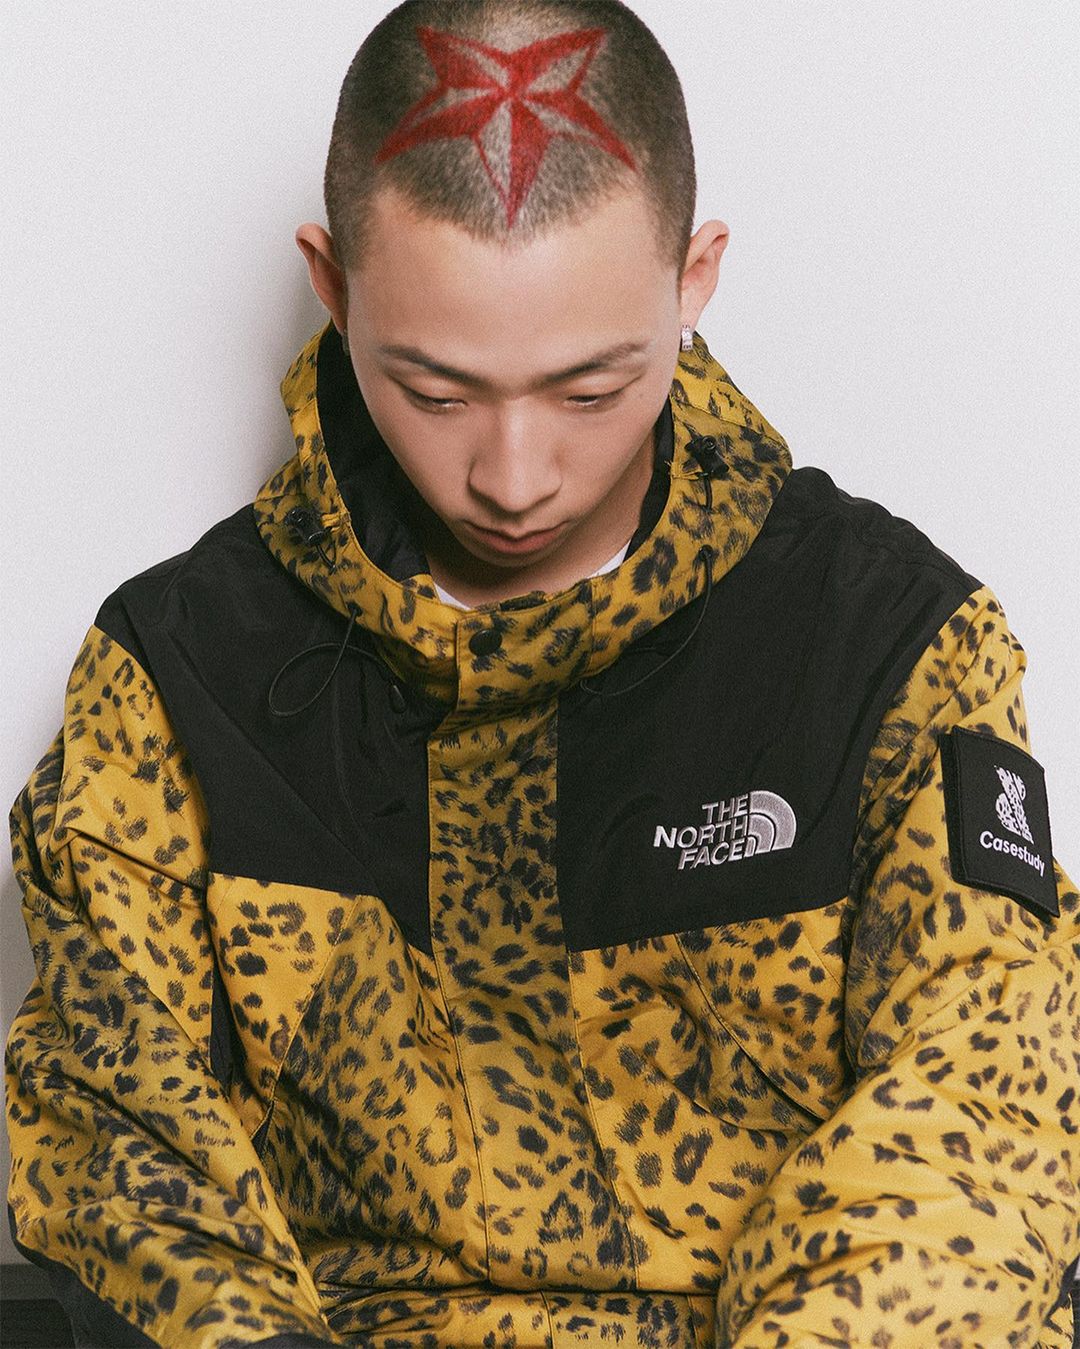 Casestudy x THE NORTH FACE 新系列曝光